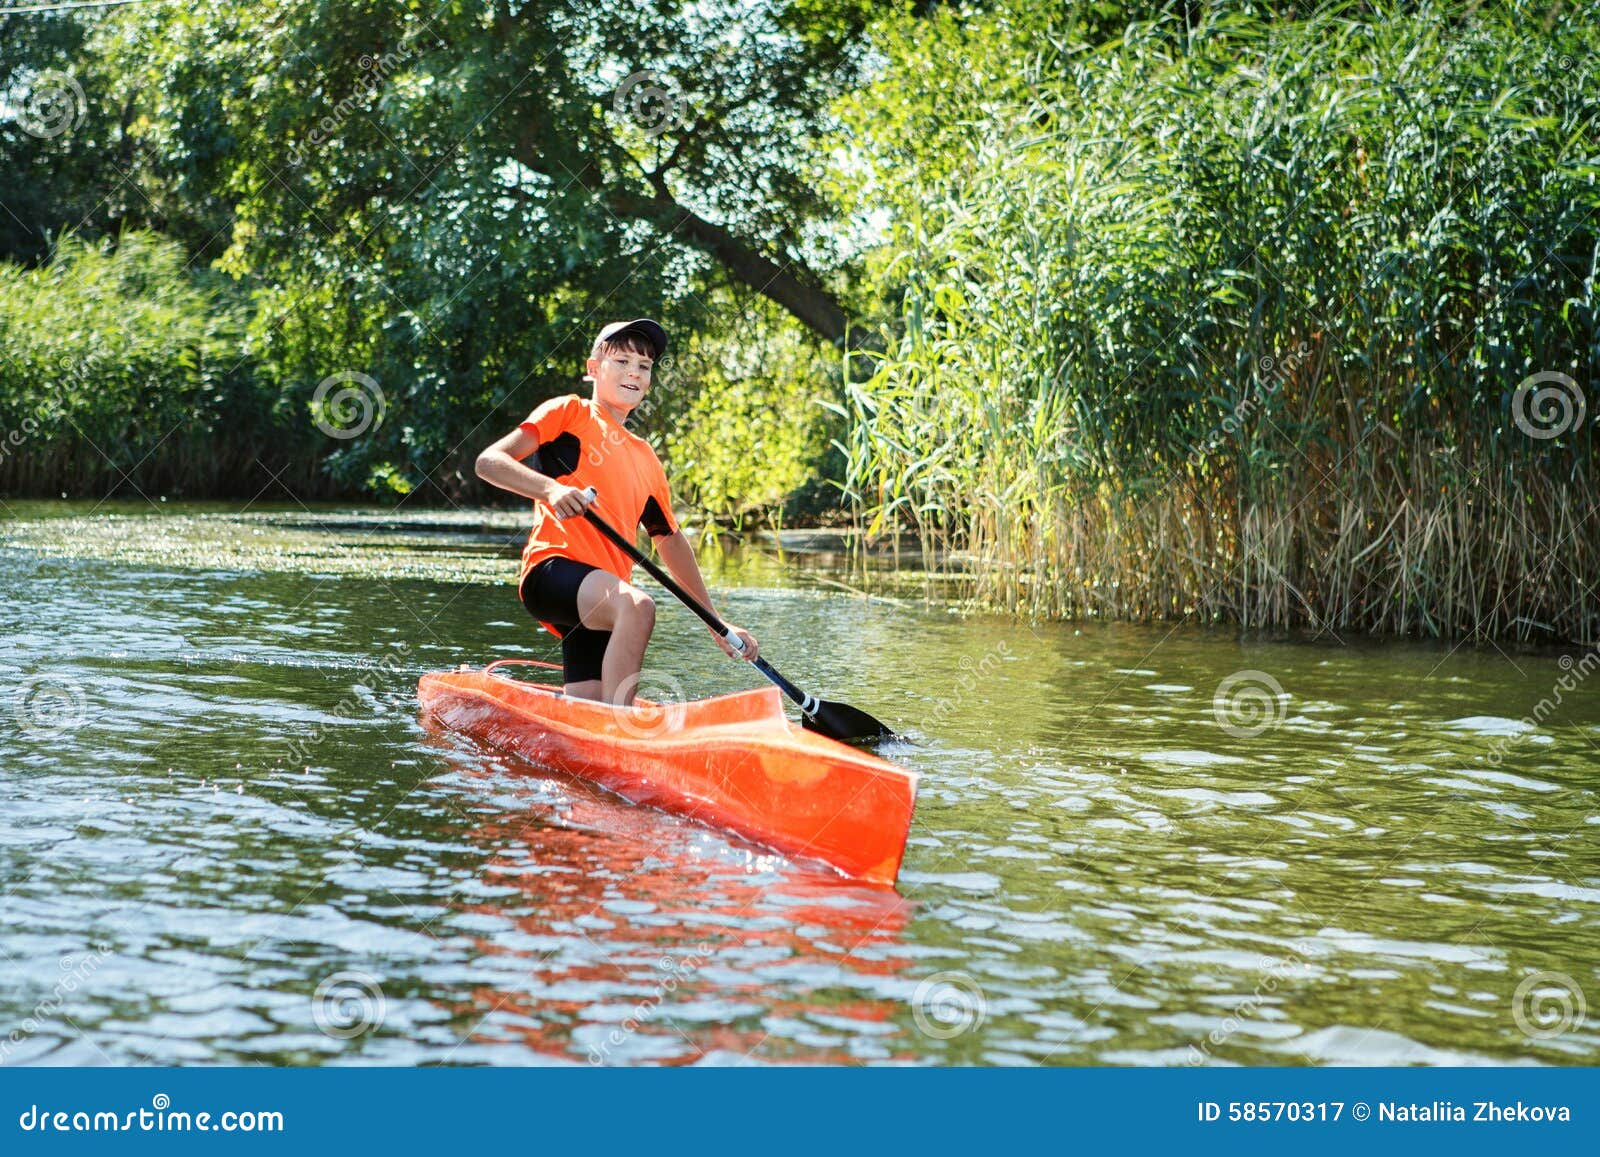 The Boy Rowing In A Canoe On The River. Stock Photo 